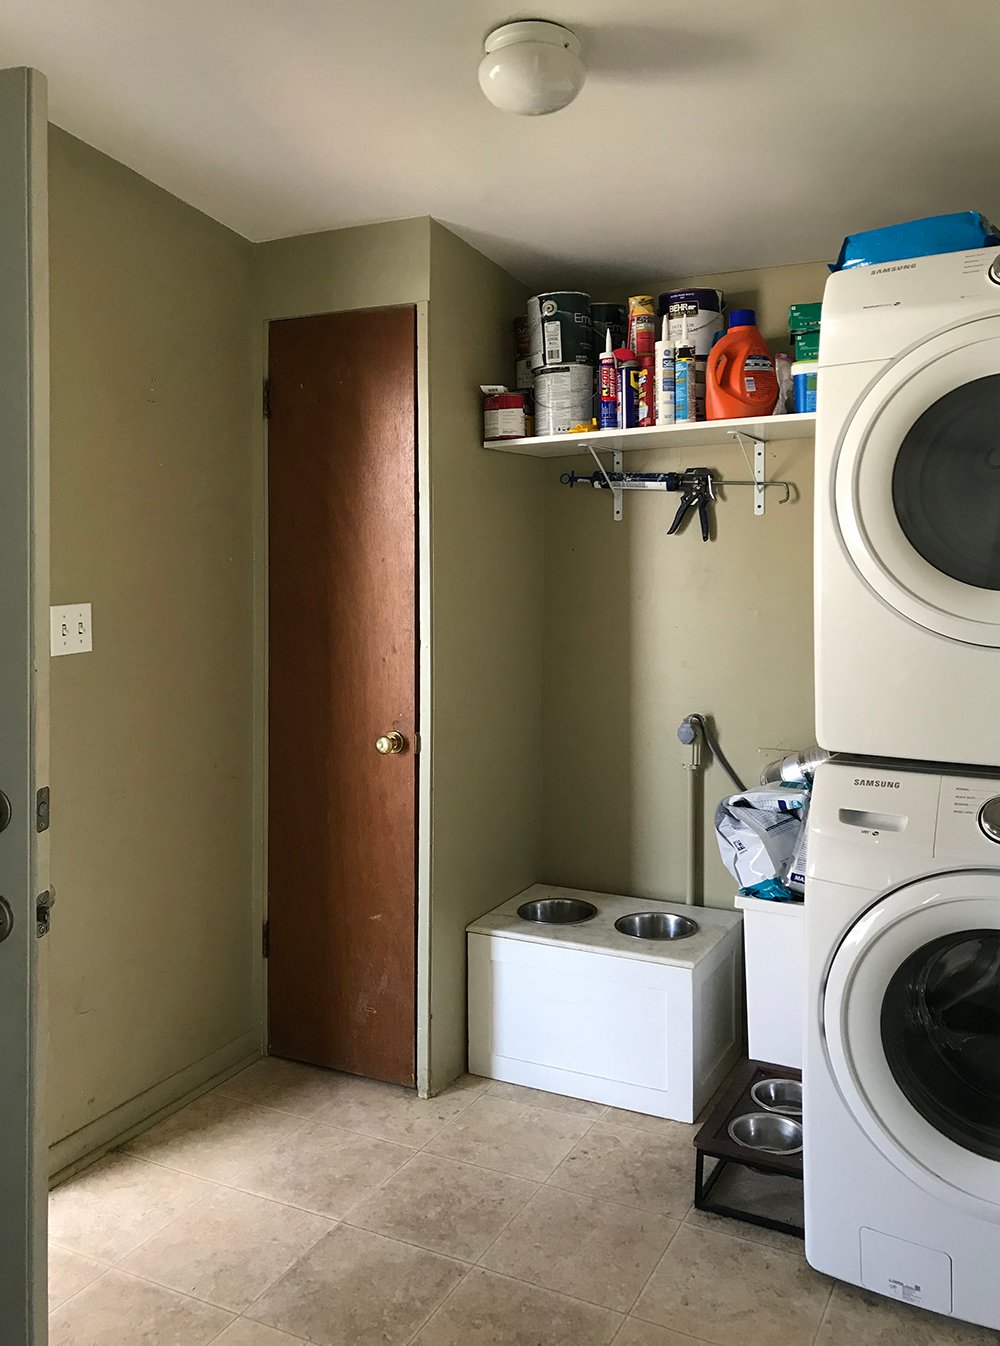 Laundry Room : One Room Challenge - Week 1 - roomfortuesday.com